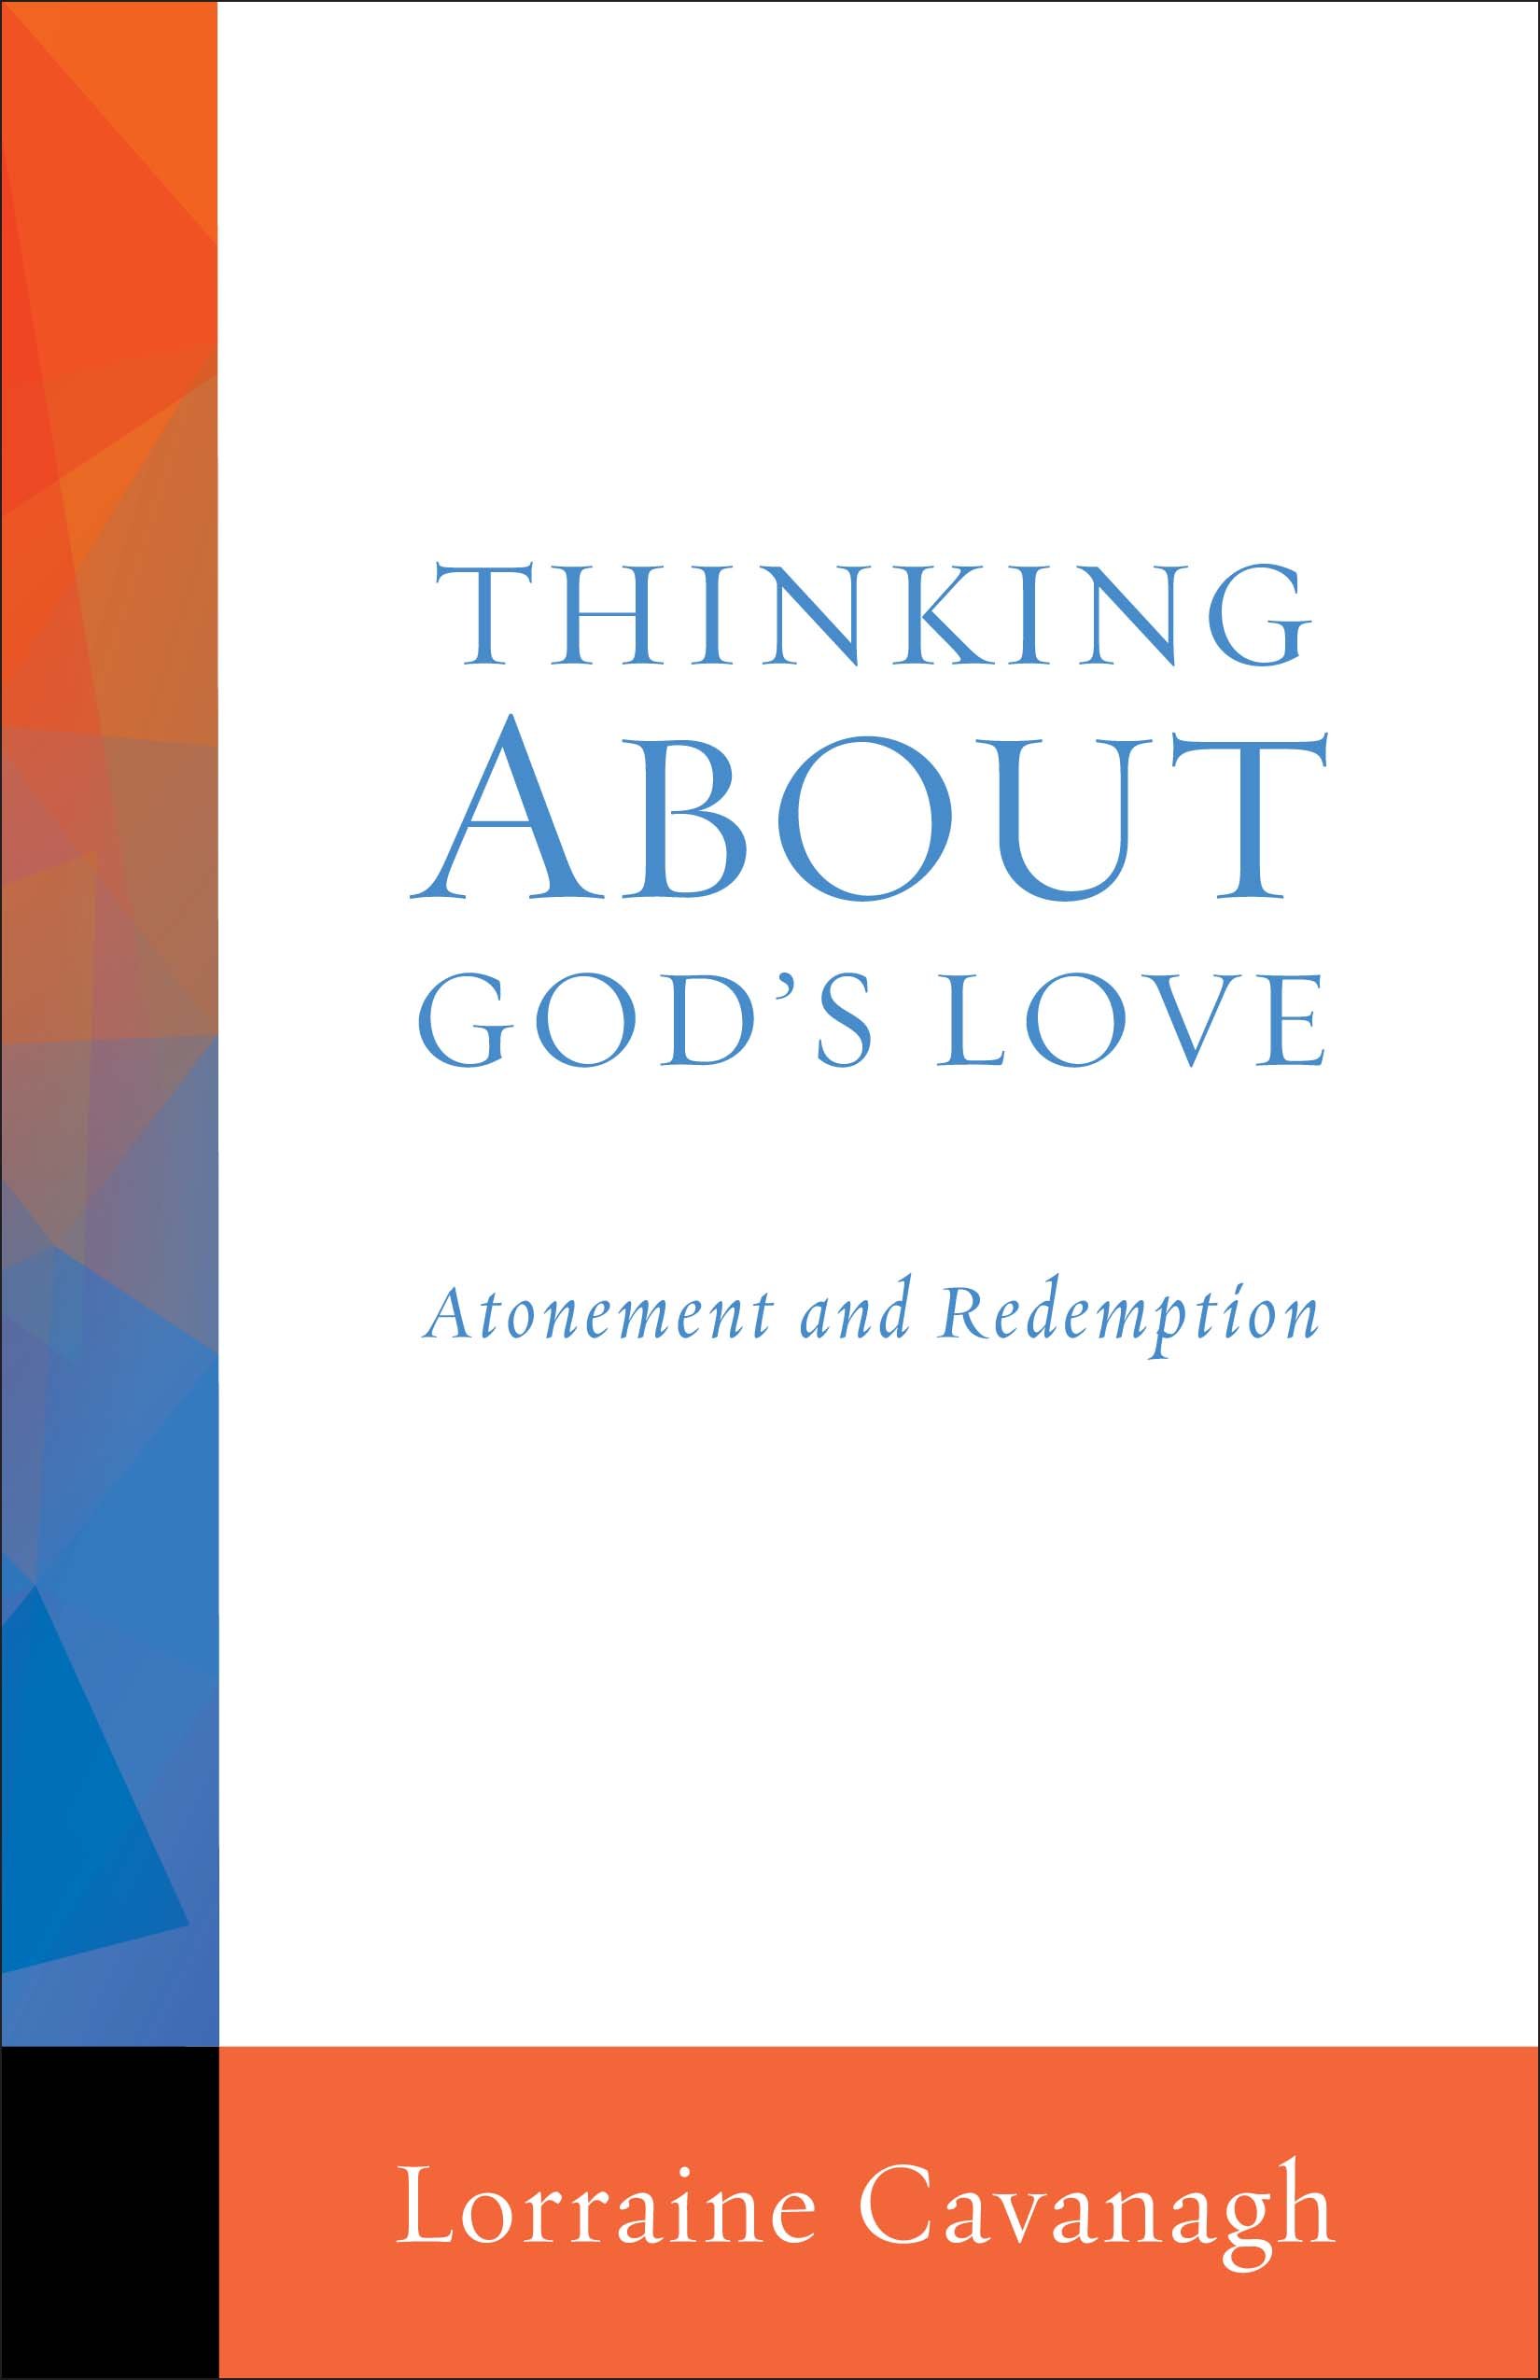 Thinking About God's Love: Atonement and Redemption